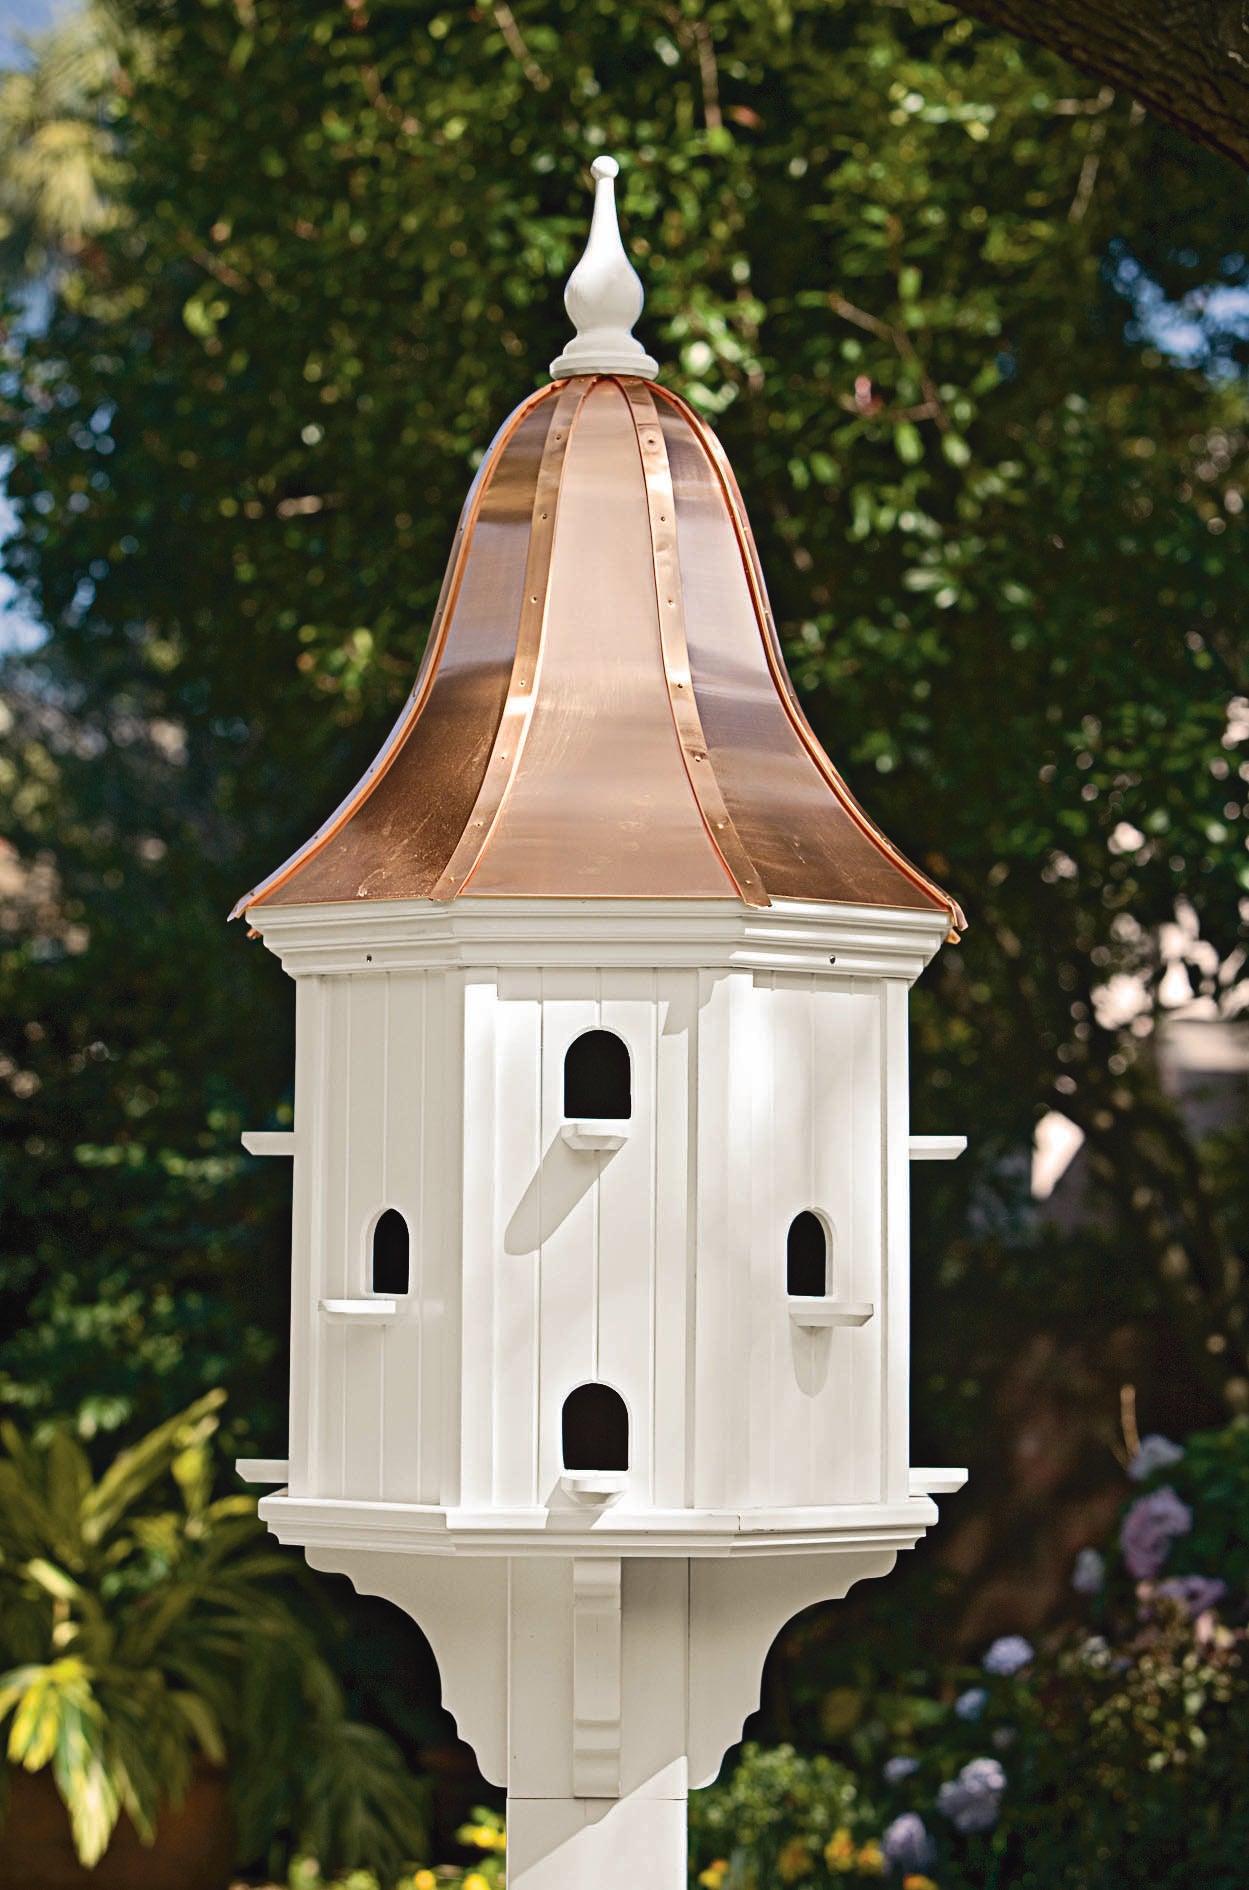 Martin Birdhouse Mansion with Copper Roof